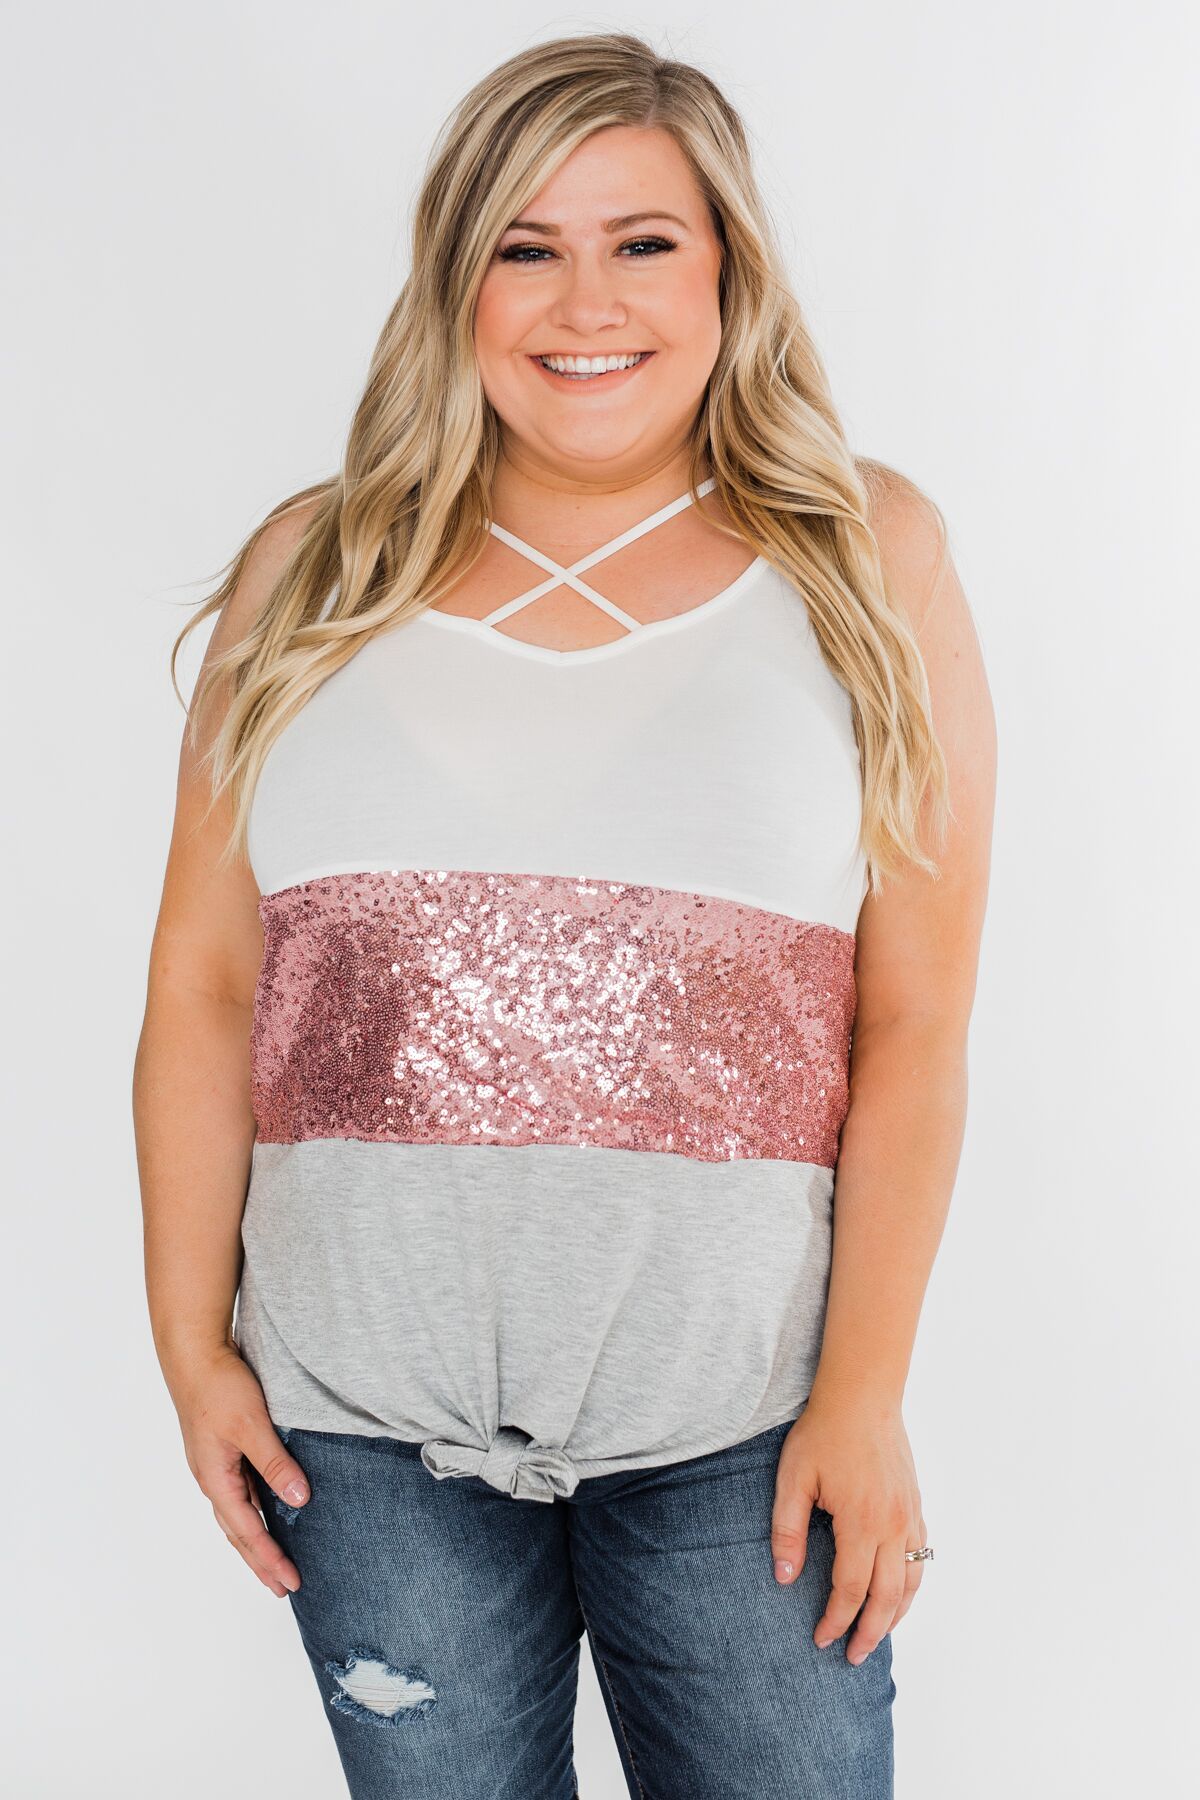 Full Of Sparkle Front Knot Halter Top- Ivory, Pink, & Gray